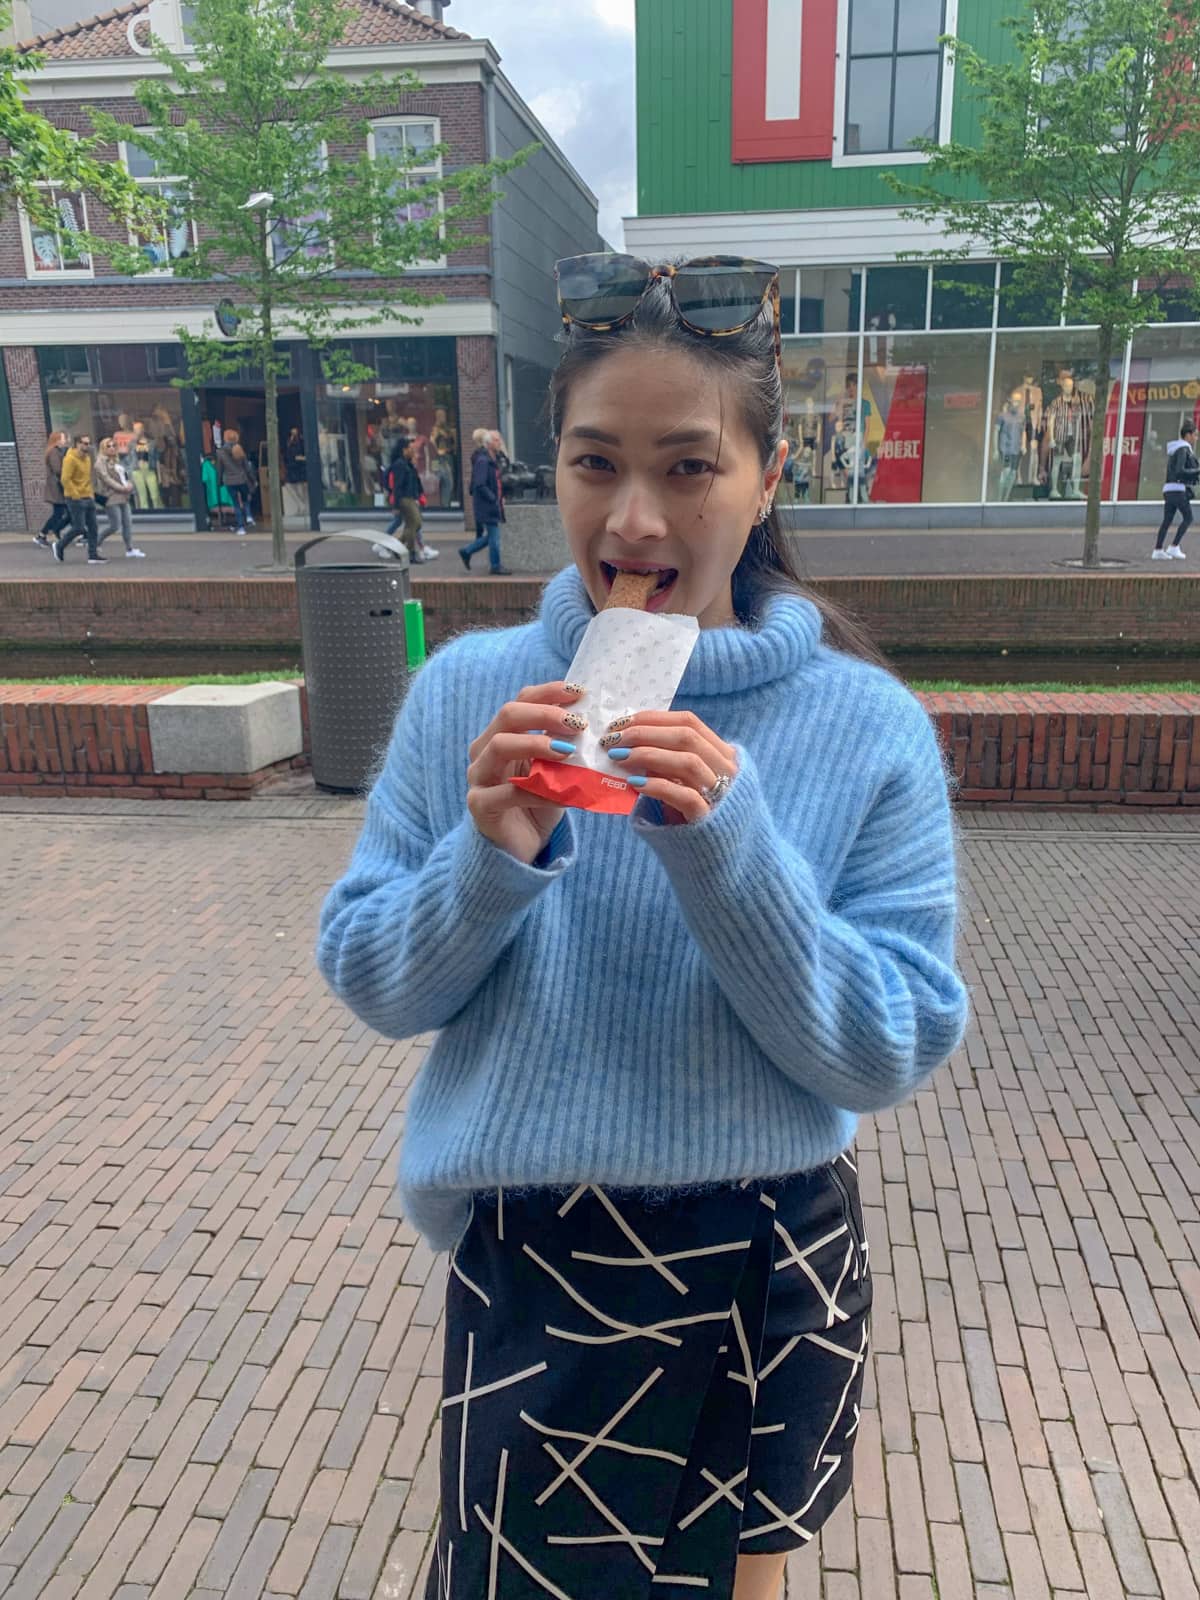 A woman in a blue sweater eating a deep-fried sausage out of a paper bag. In the background is an outdoor shopping mall